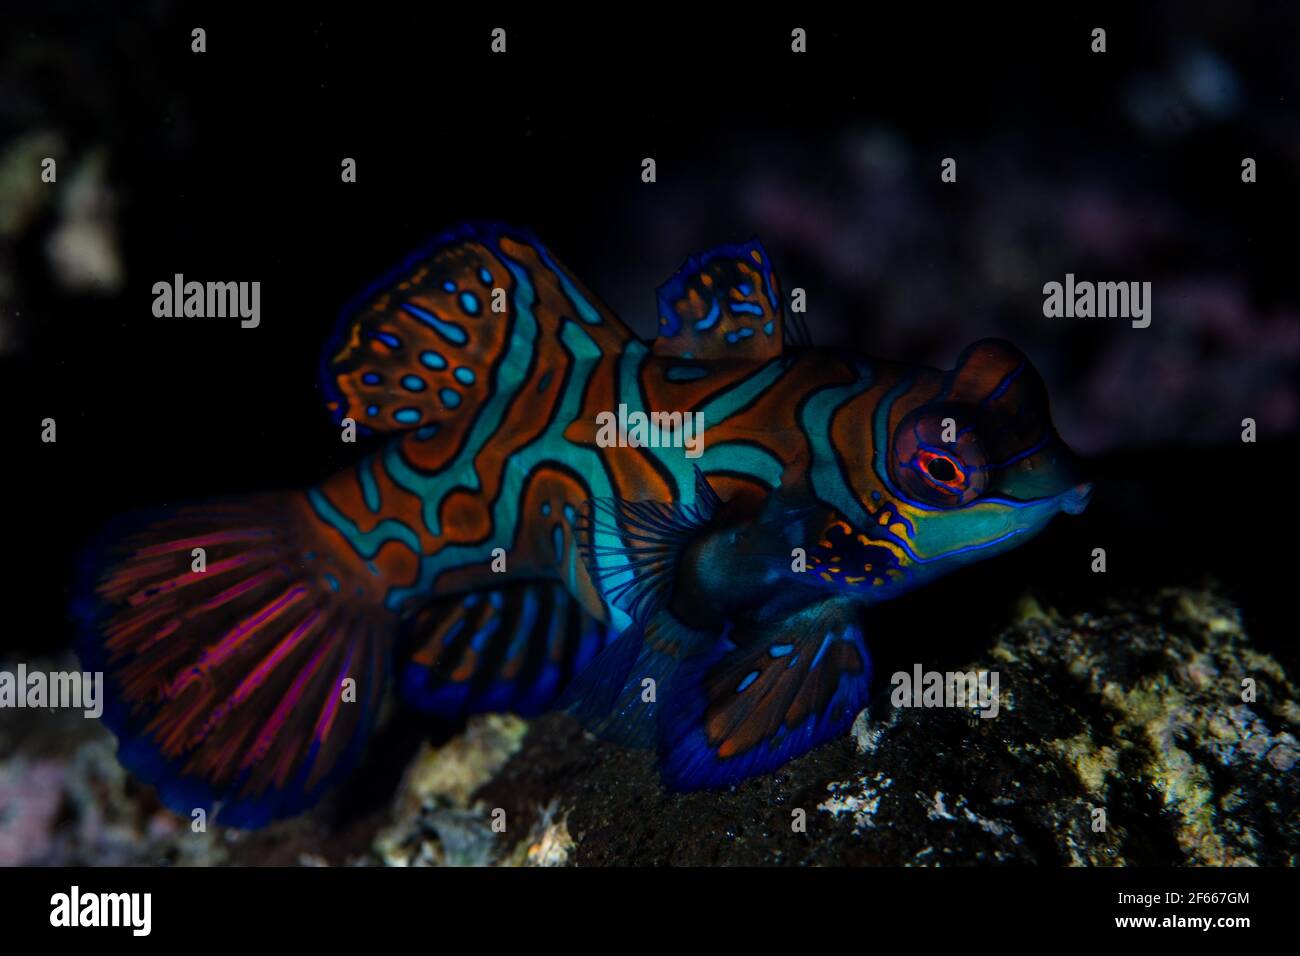 A Mandarinfish, Pterosynchiropus splendidus, swims over a rubble seafloor in Indonesia. These beautiful fish are native to the Coral Triangle region. Stock Photo